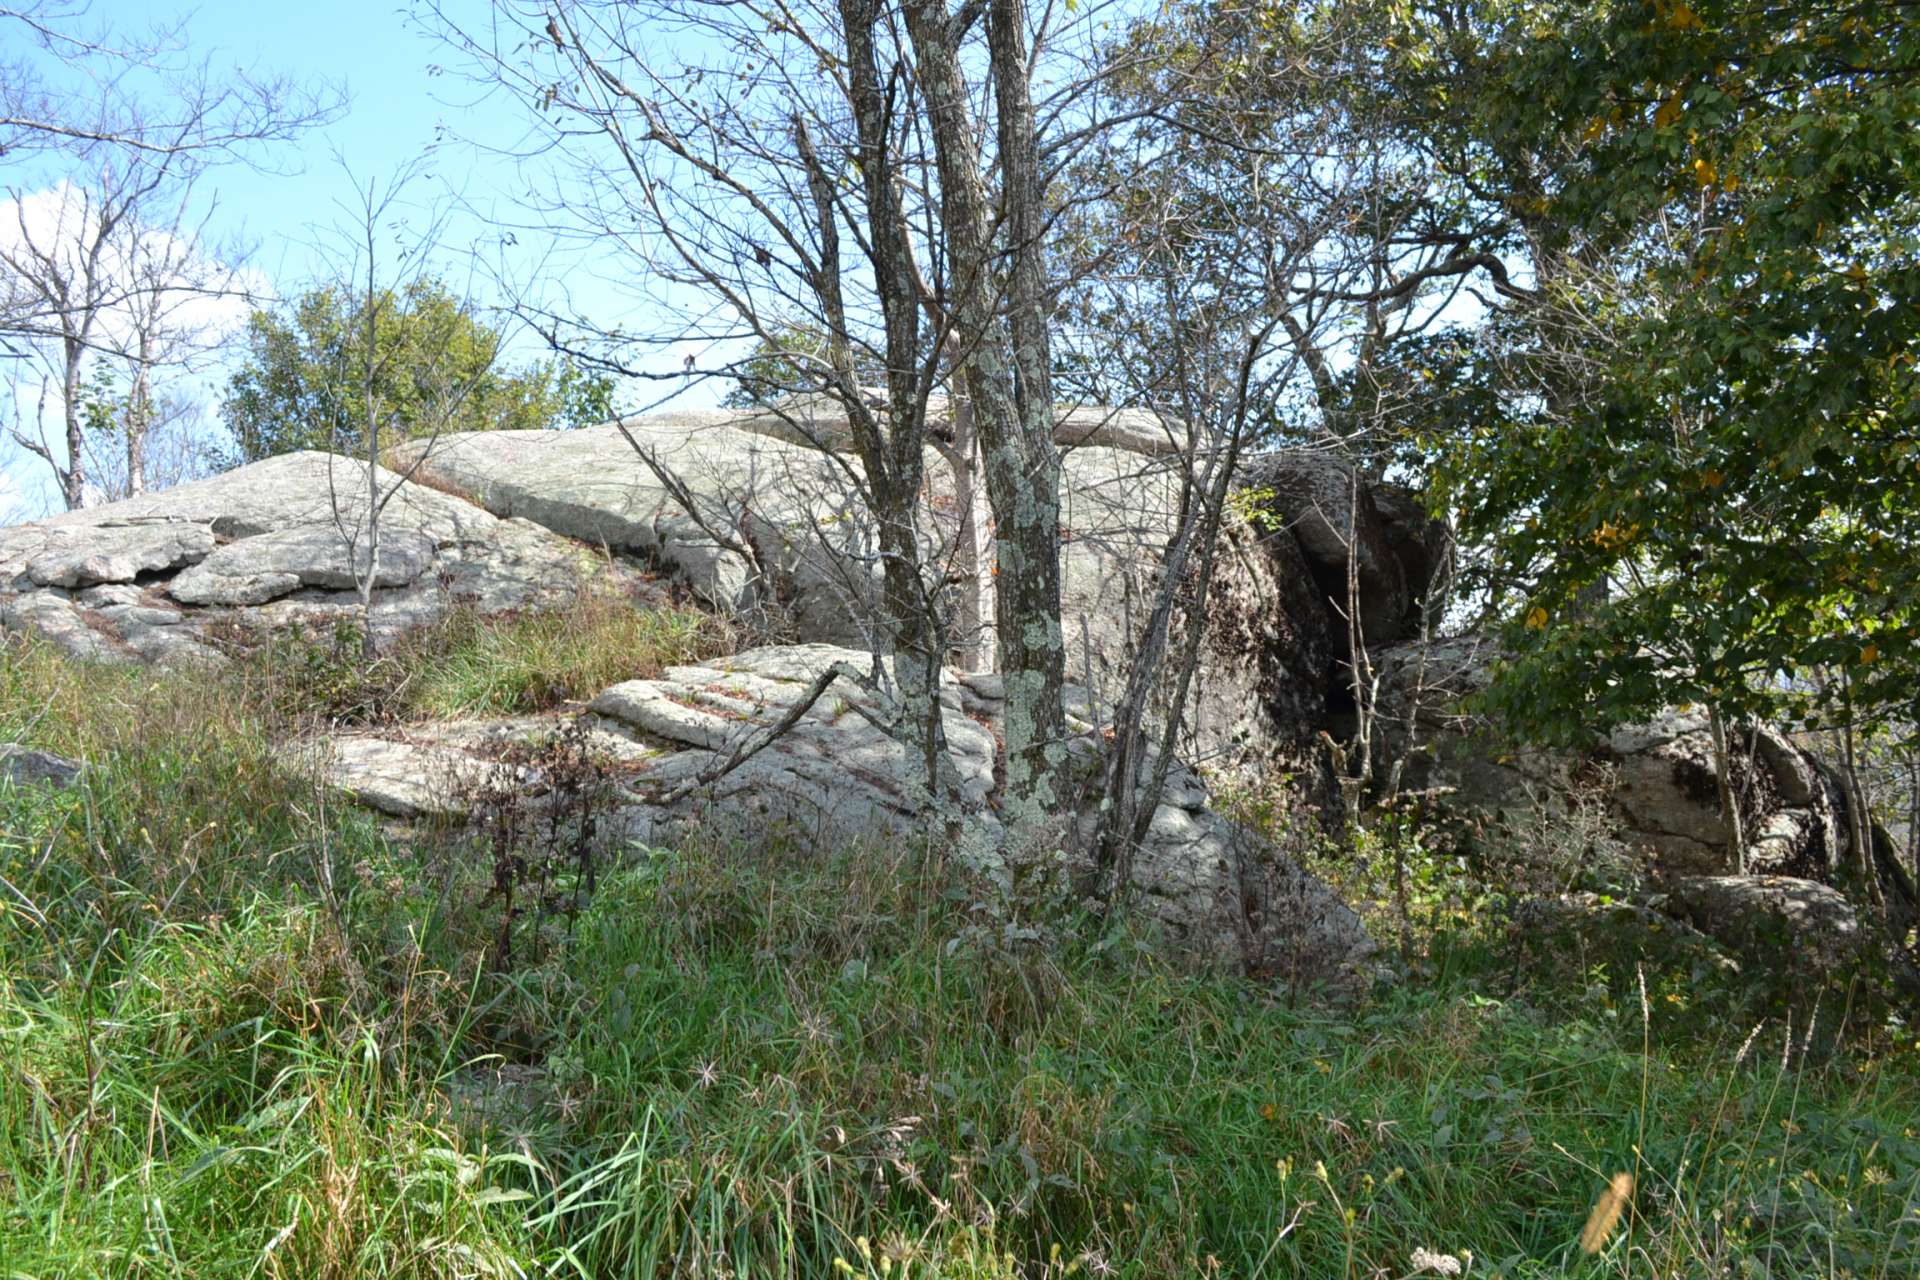 Unique rock formations and exposed boulders provide natural landscaping accents.